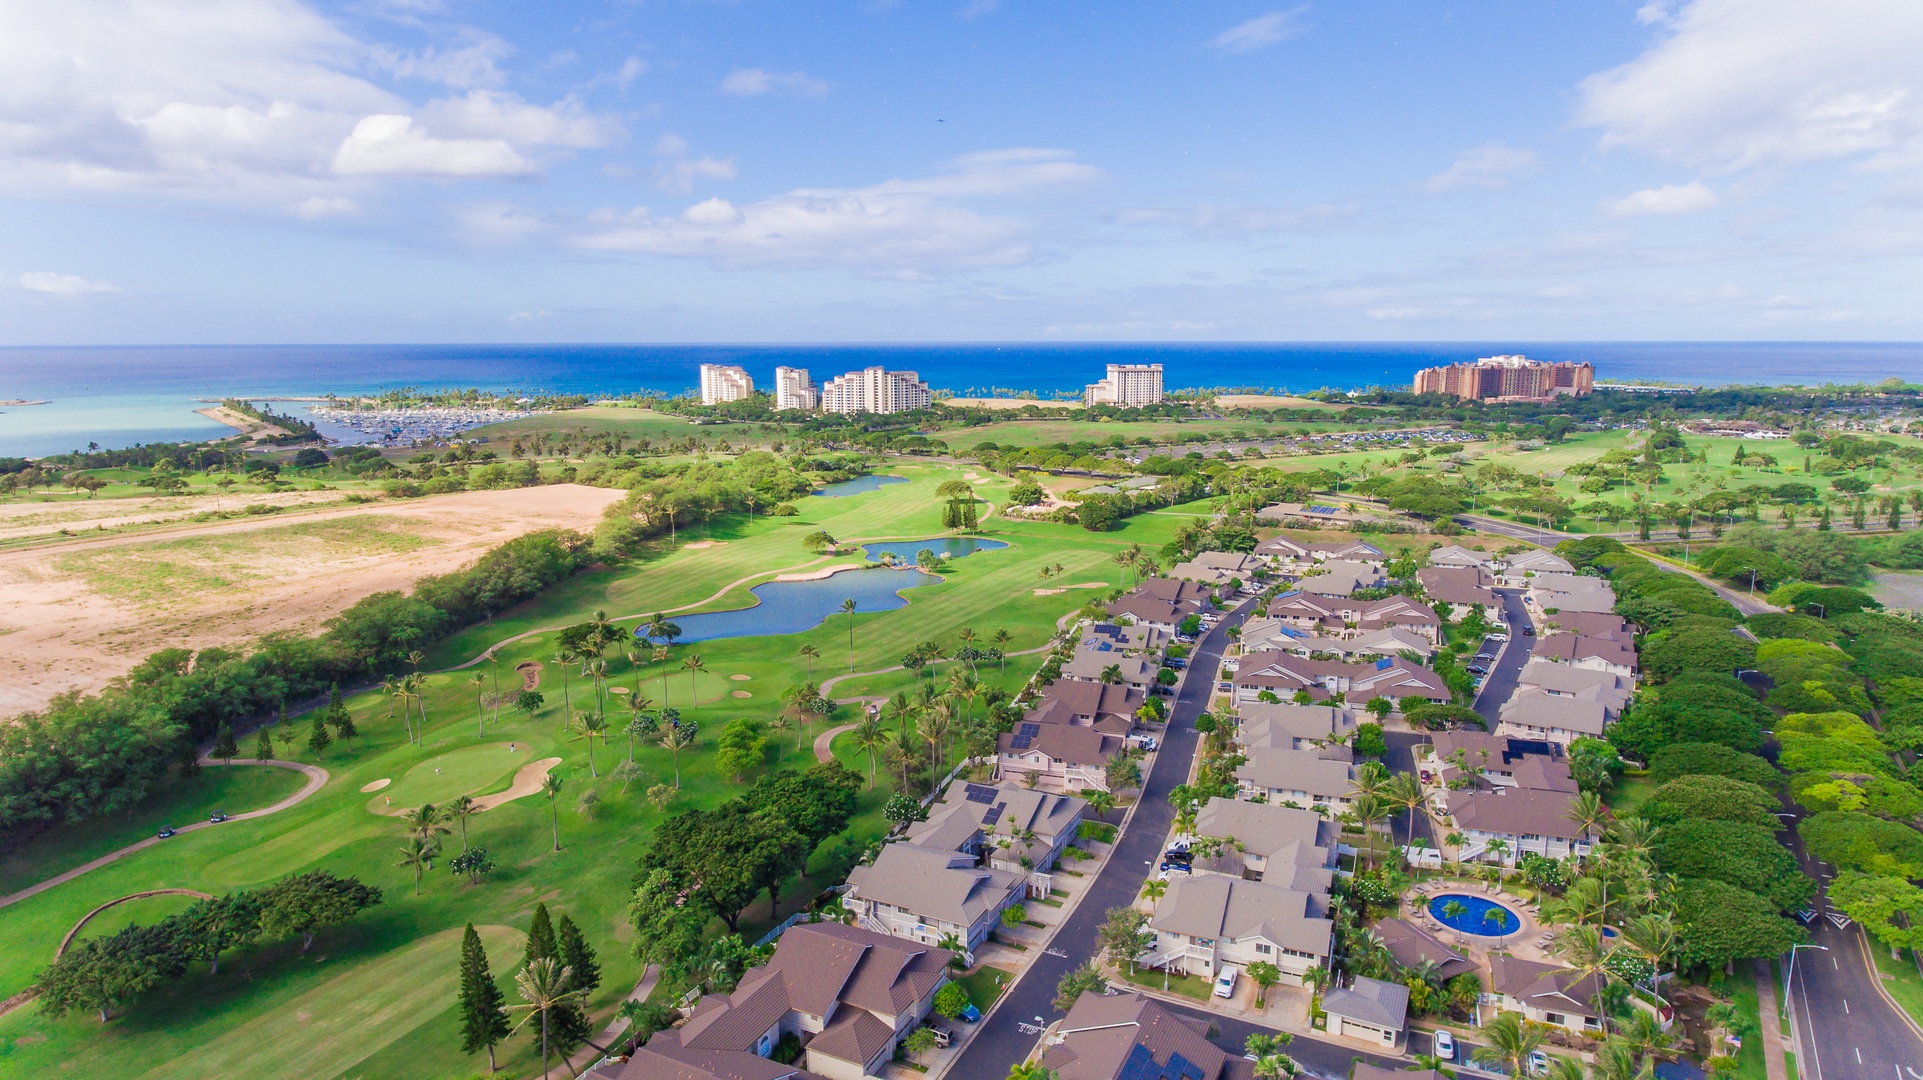 Kapolei Vacation Rentals, Coconut Plantation 1222-3 - An aerial view of the island community.